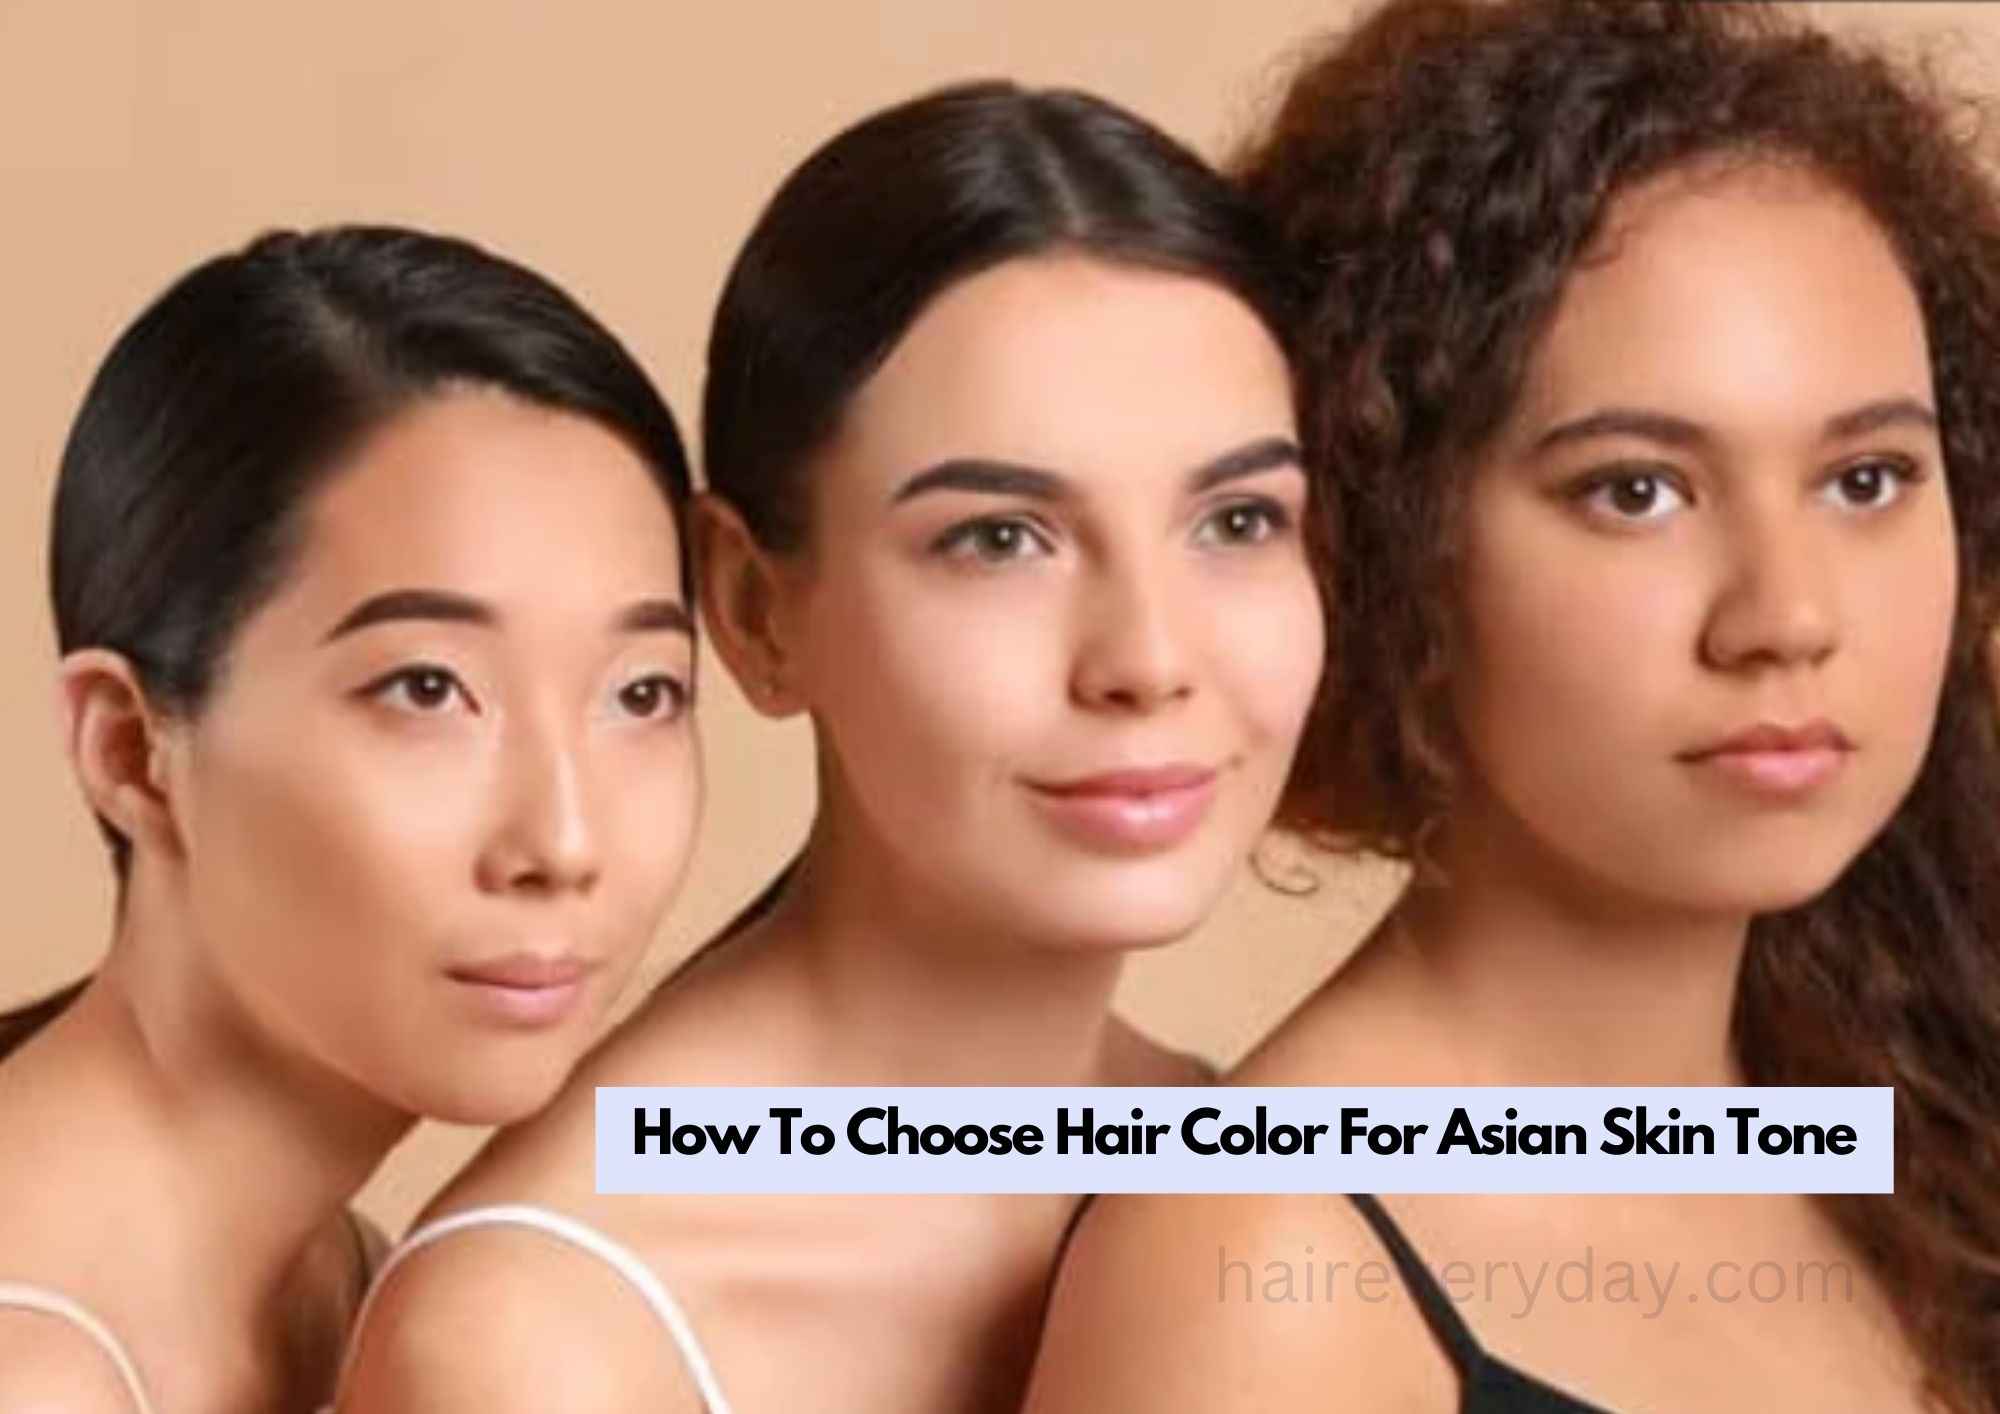 How To Choose Hair Color For Asian Skin Tone | In 5 Easy Steps - Hair  Everyday Review